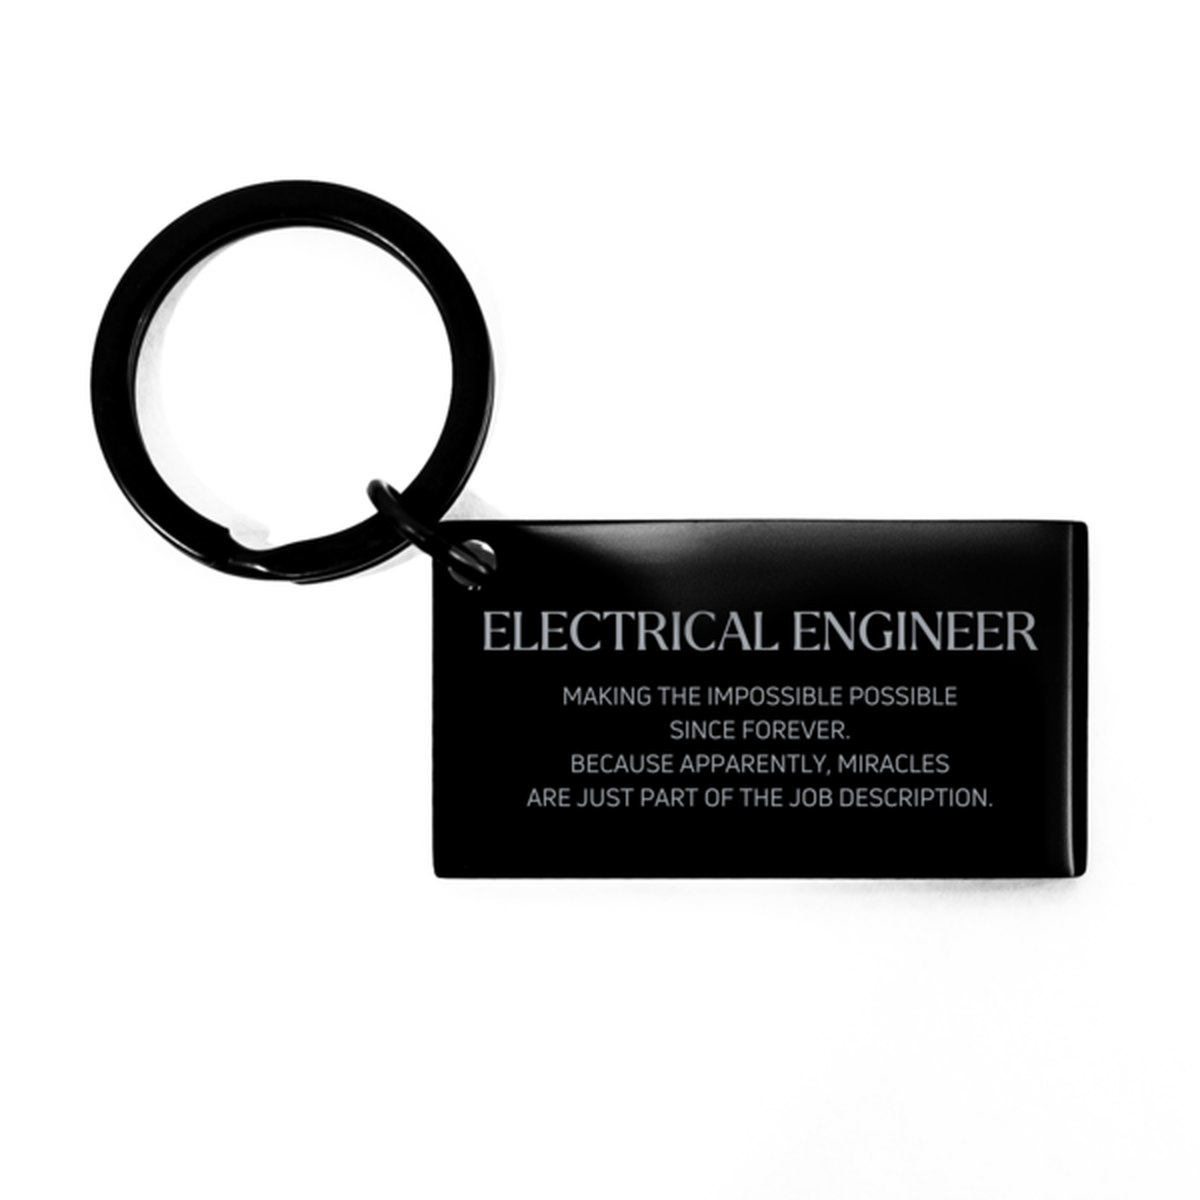 Funny Electrical Engineer Gifts, Miracles are just part of the job description, Inspirational Birthday Keychain For Electrical Engineer, Men, Women, Coworkers, Friends, Boss